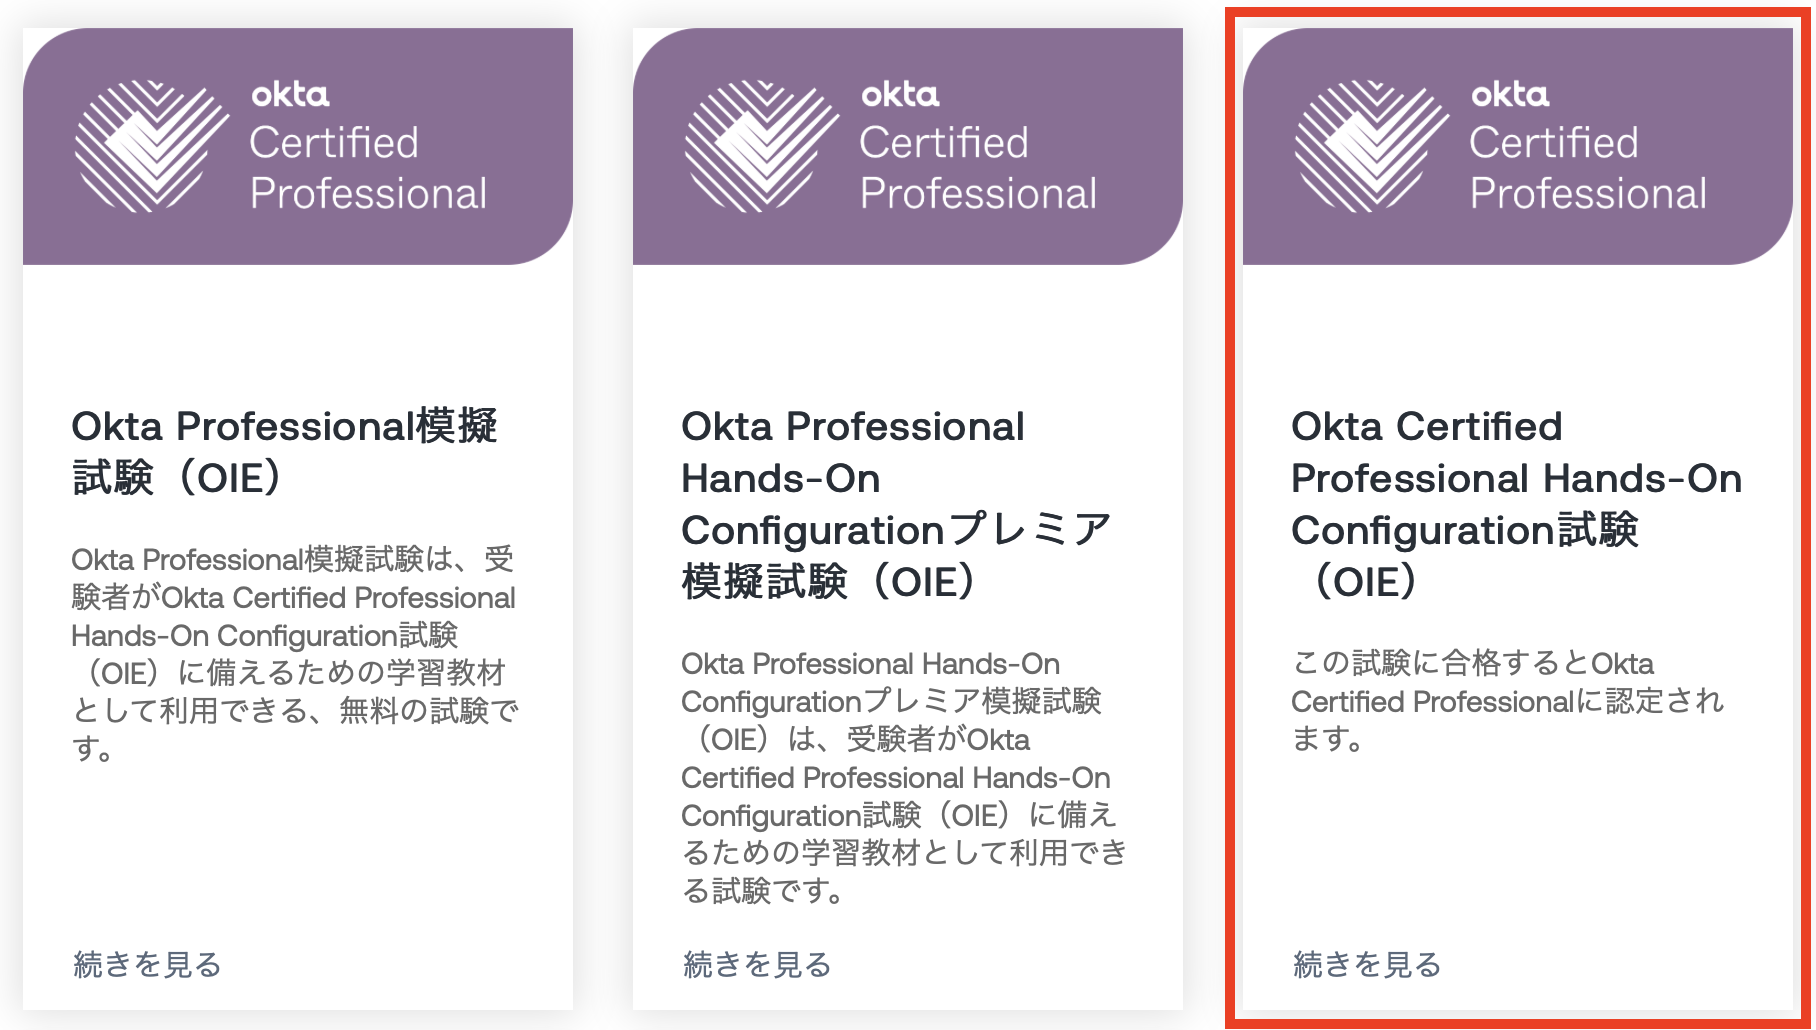 Image of the Okta Certified Professional Hands-On Configuration (OIE) tile on a webpage.